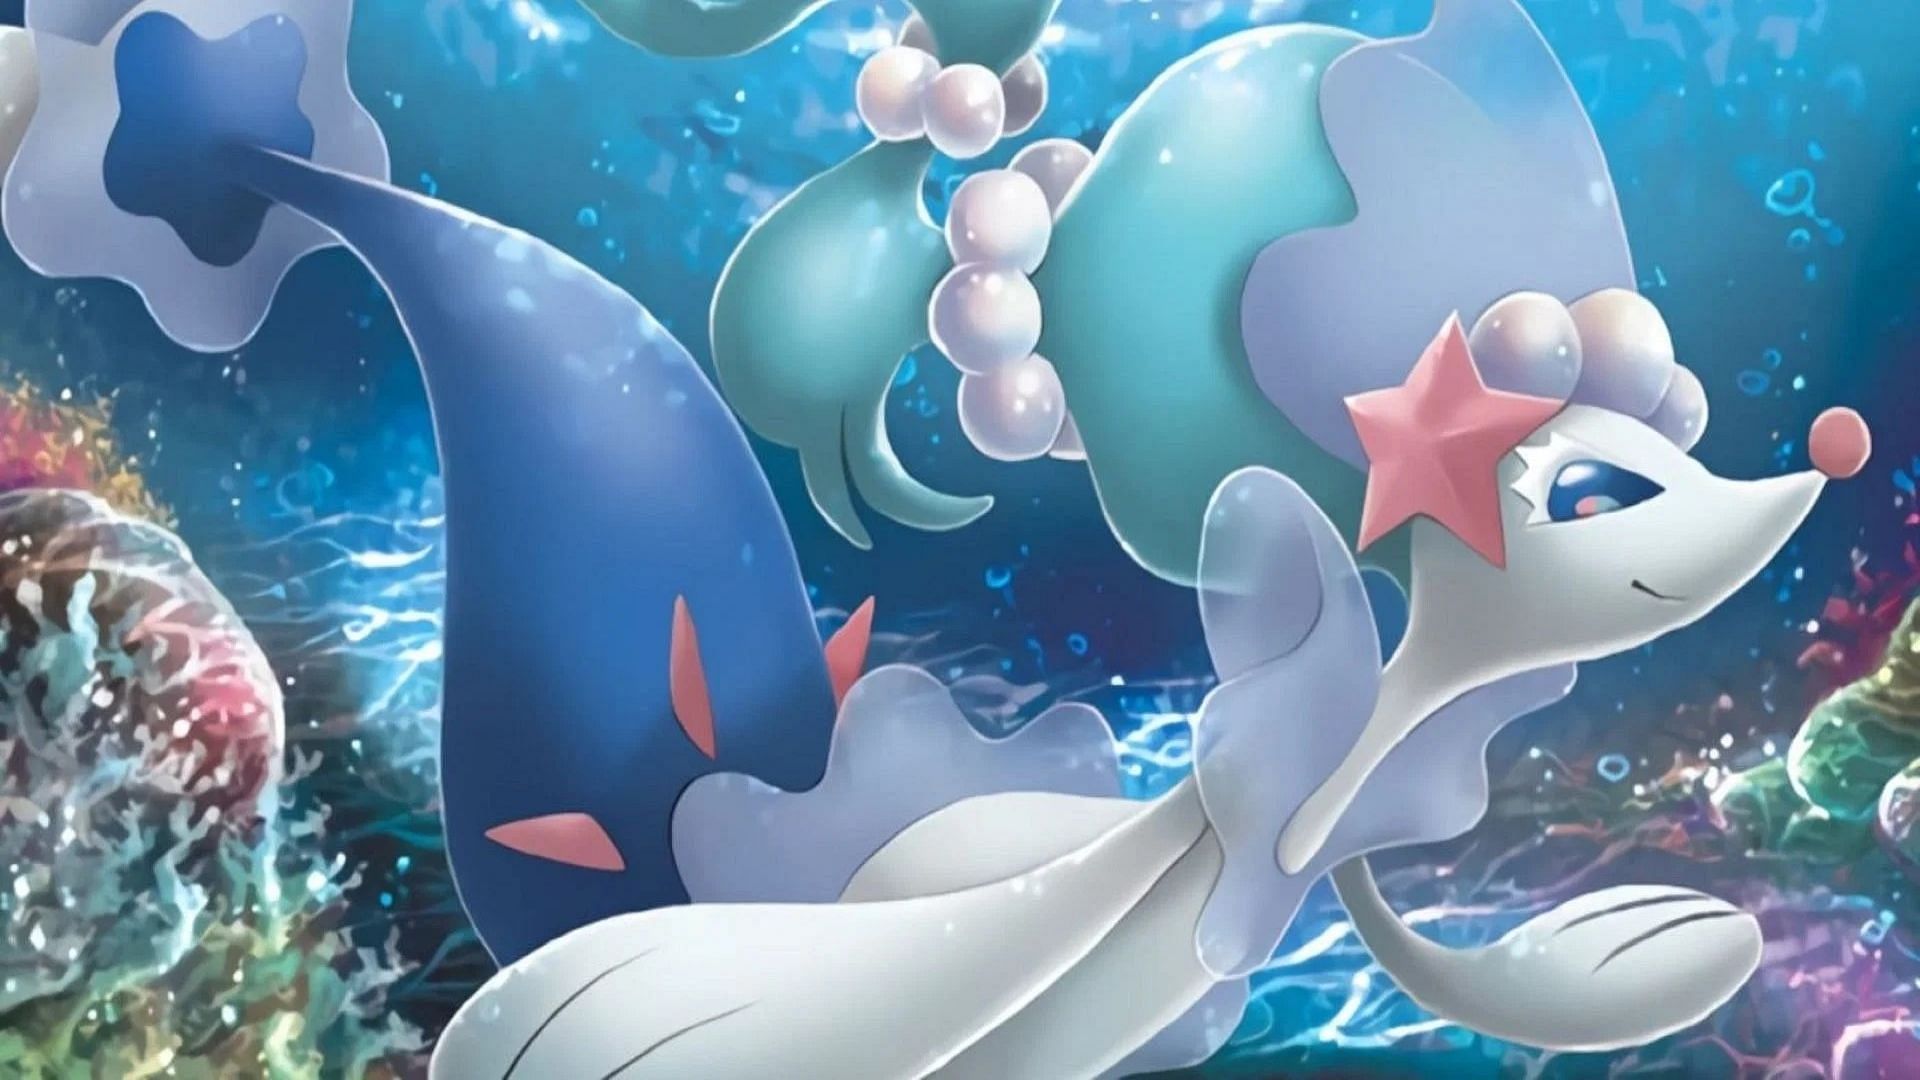 Primarina as it appears in the Pokemon Trading Card Game (Image via The Pokemon Company)